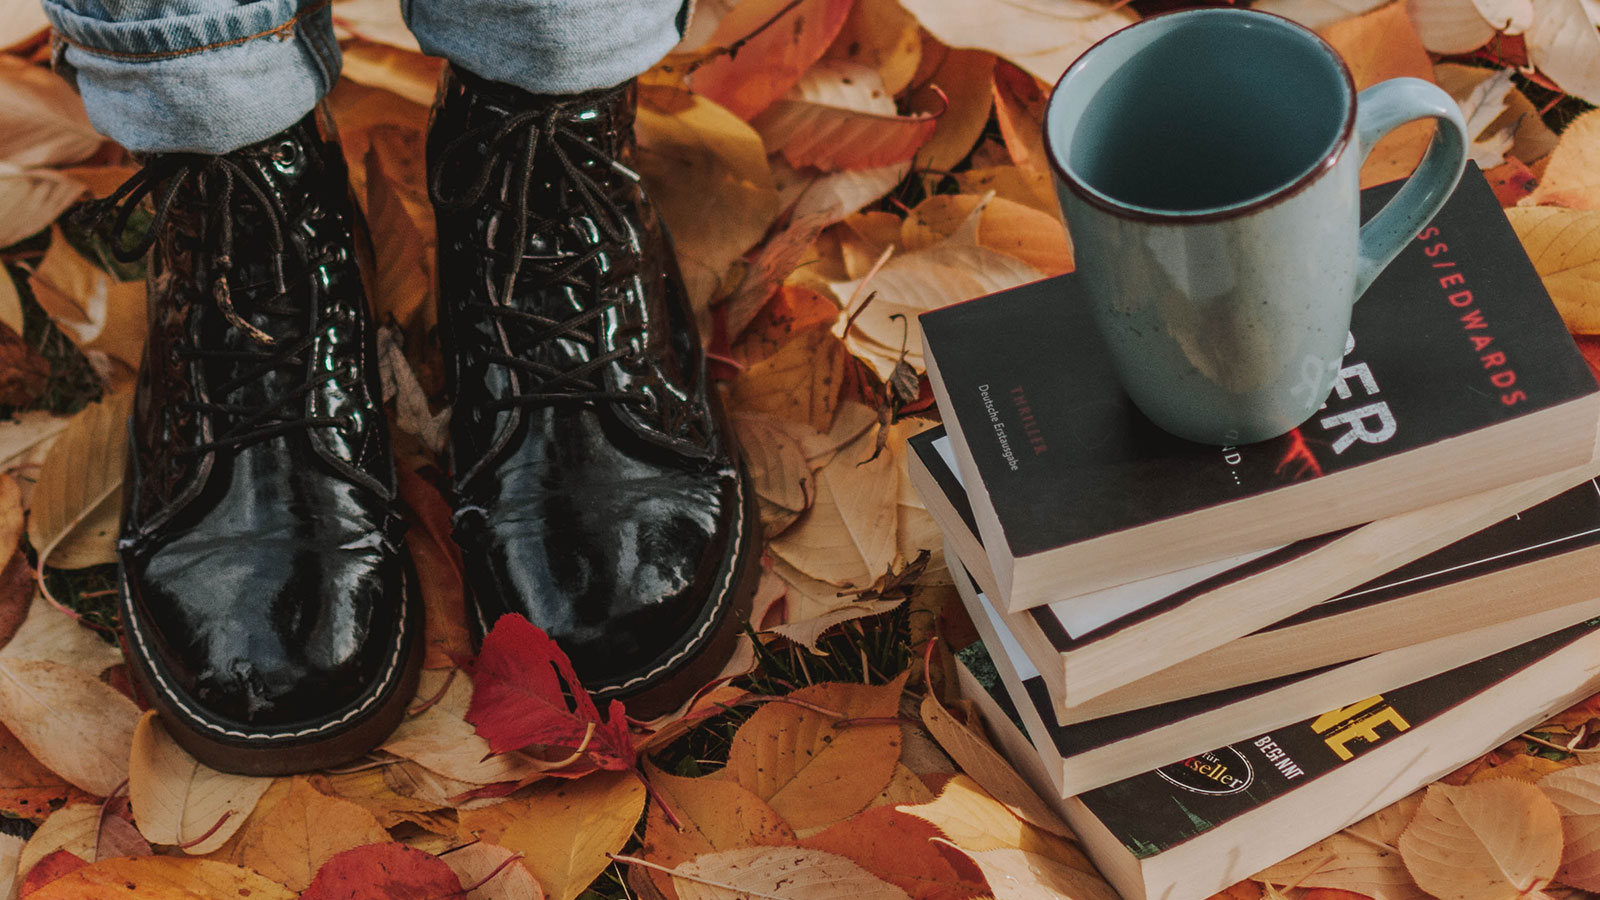 Closeup of person in shiny black boots standing next to books on fall leaves.